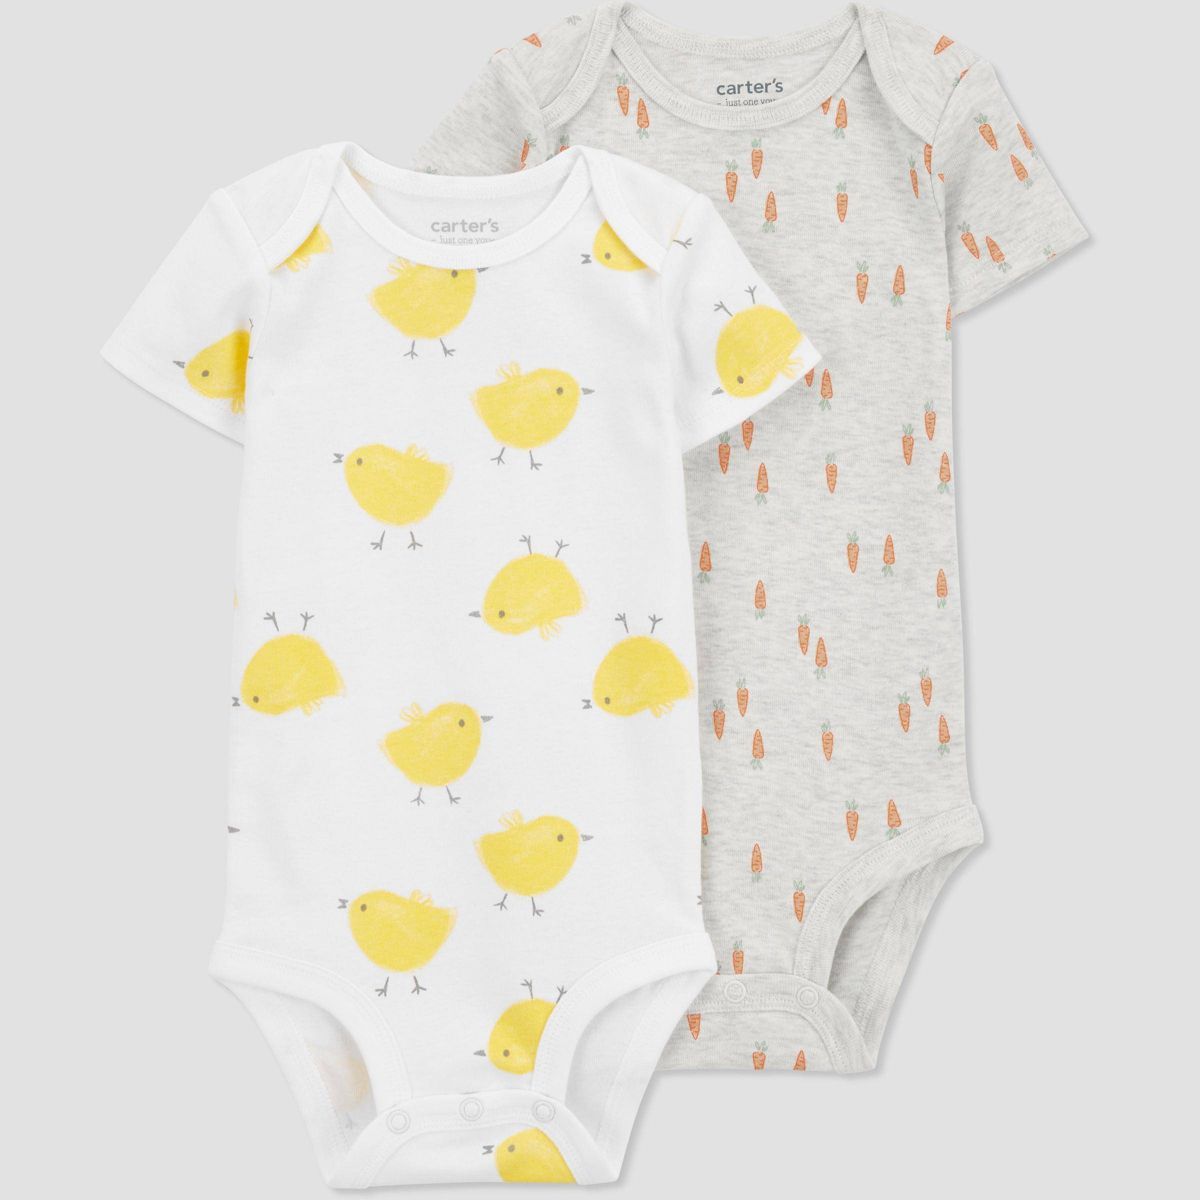 Carter's Just One You® Baby 2pk Easter End Cap Farm & Carrot Bodysuit - Gray/Orange/Yellow | Target